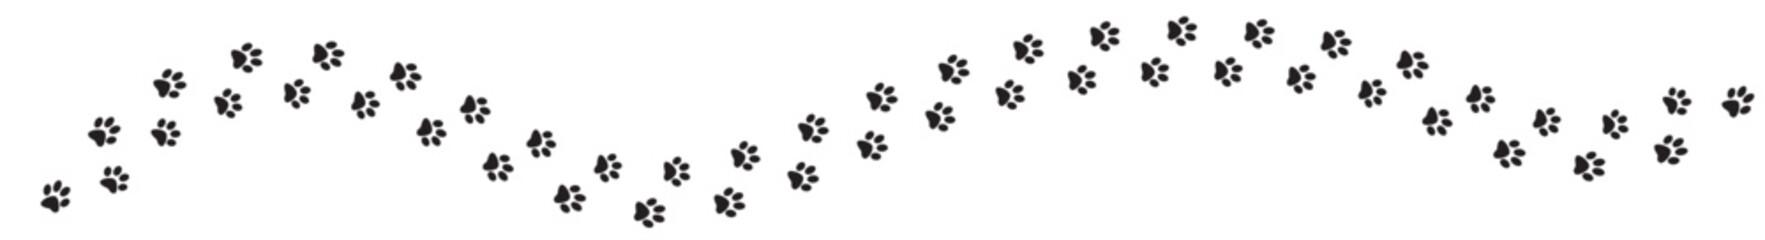 cat paws or steps. footprint of cat walking in zigzag path. Cat paws vector design.